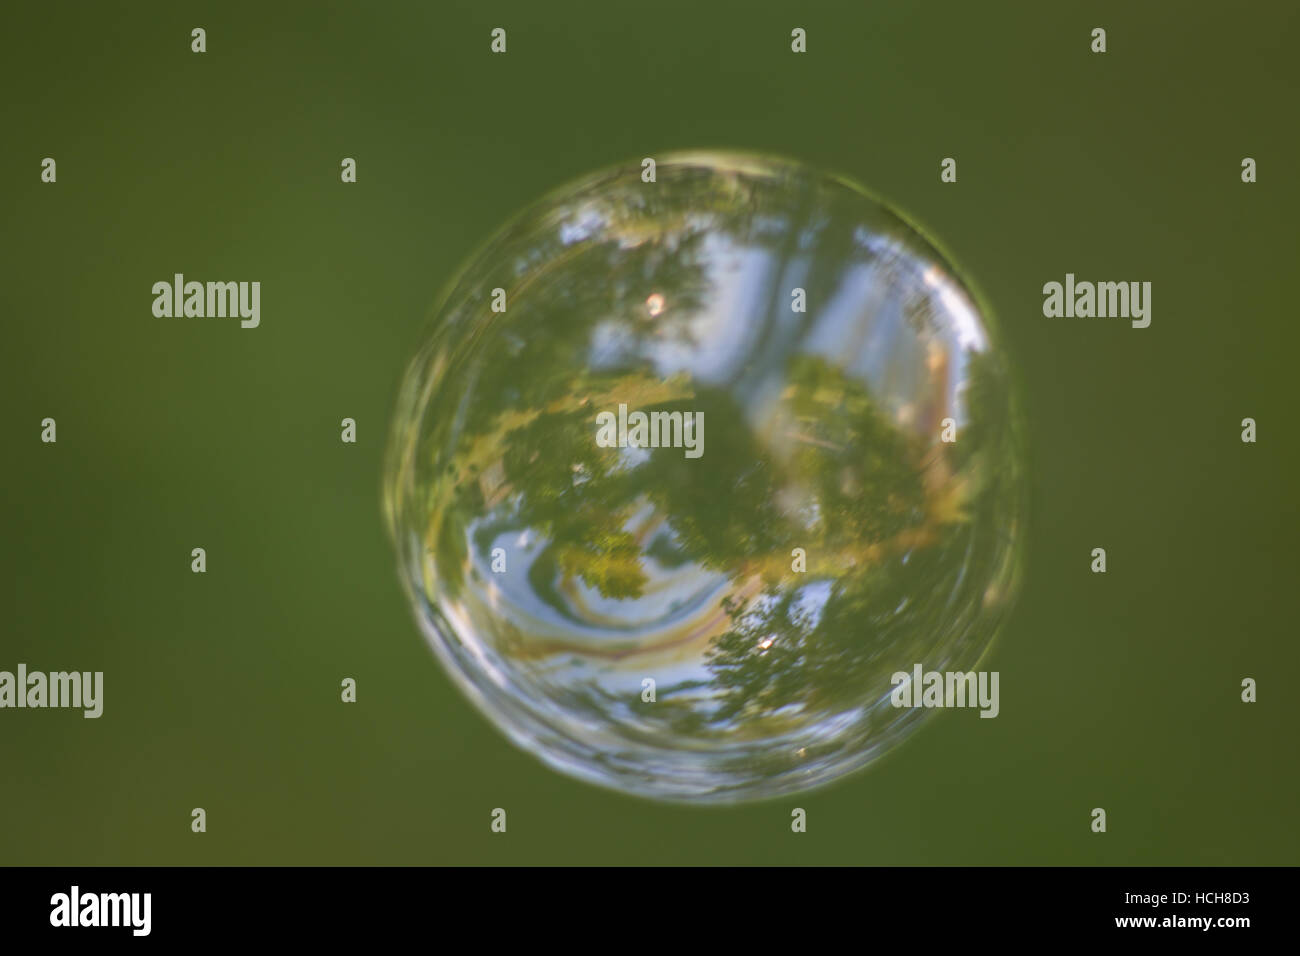 Close up of a soap bubble with green background and the reflections of trees, grass, and sky Stock Photo